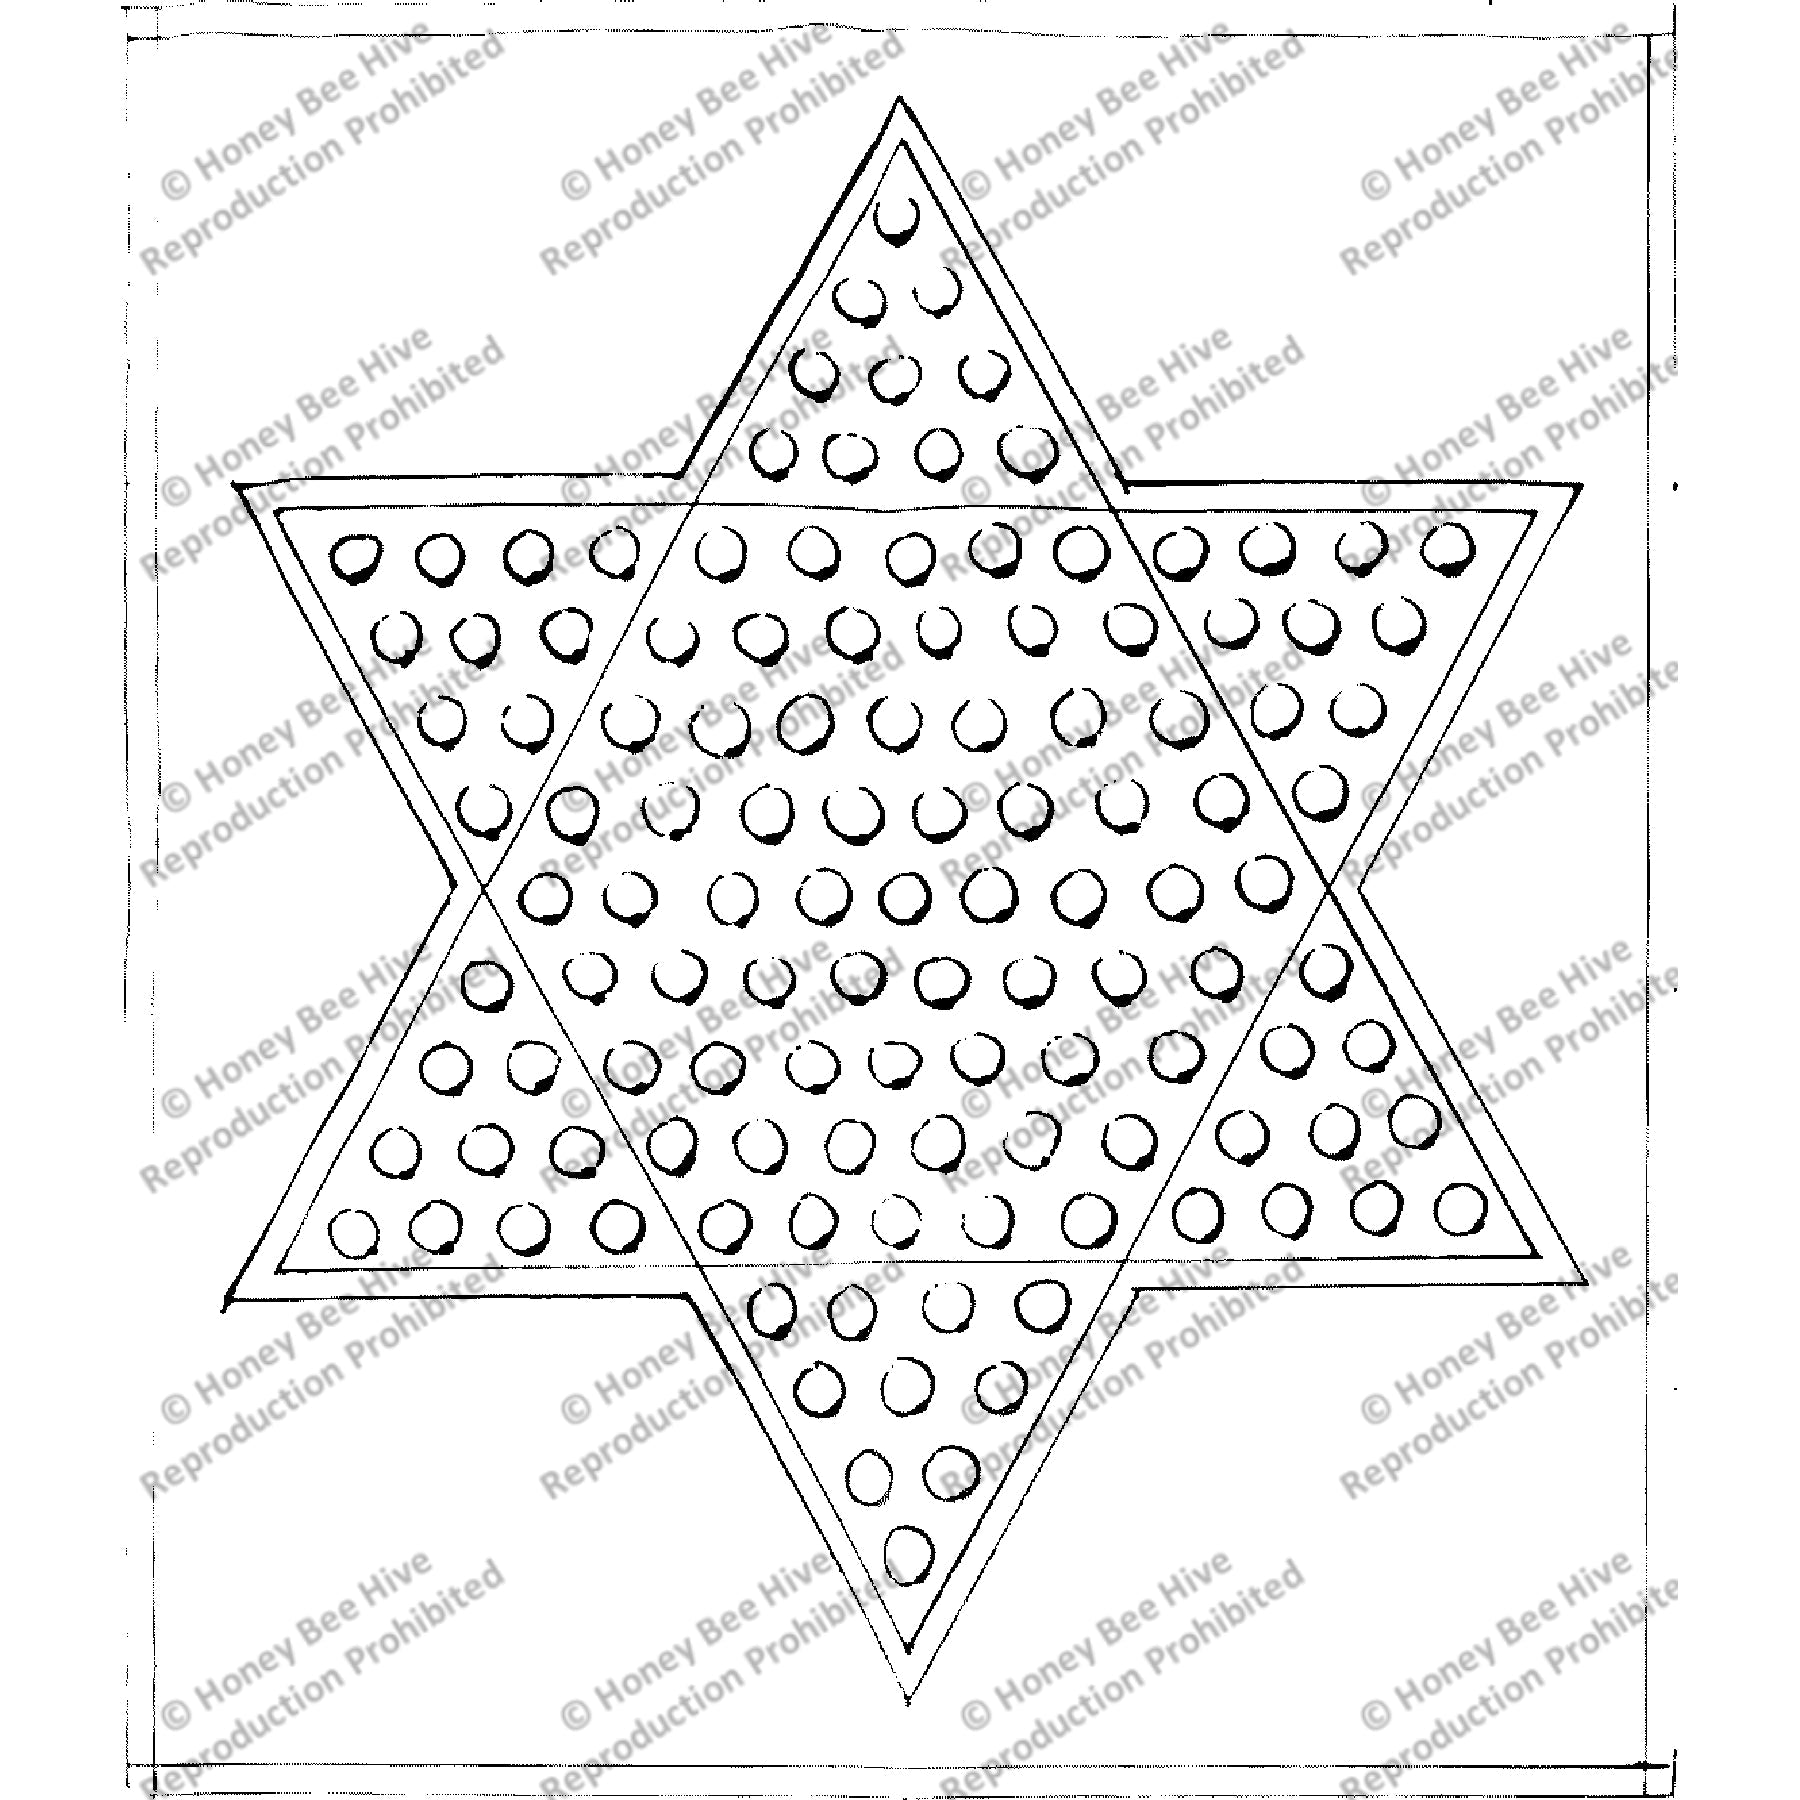 Chinese Checkers, rug hooking pattern